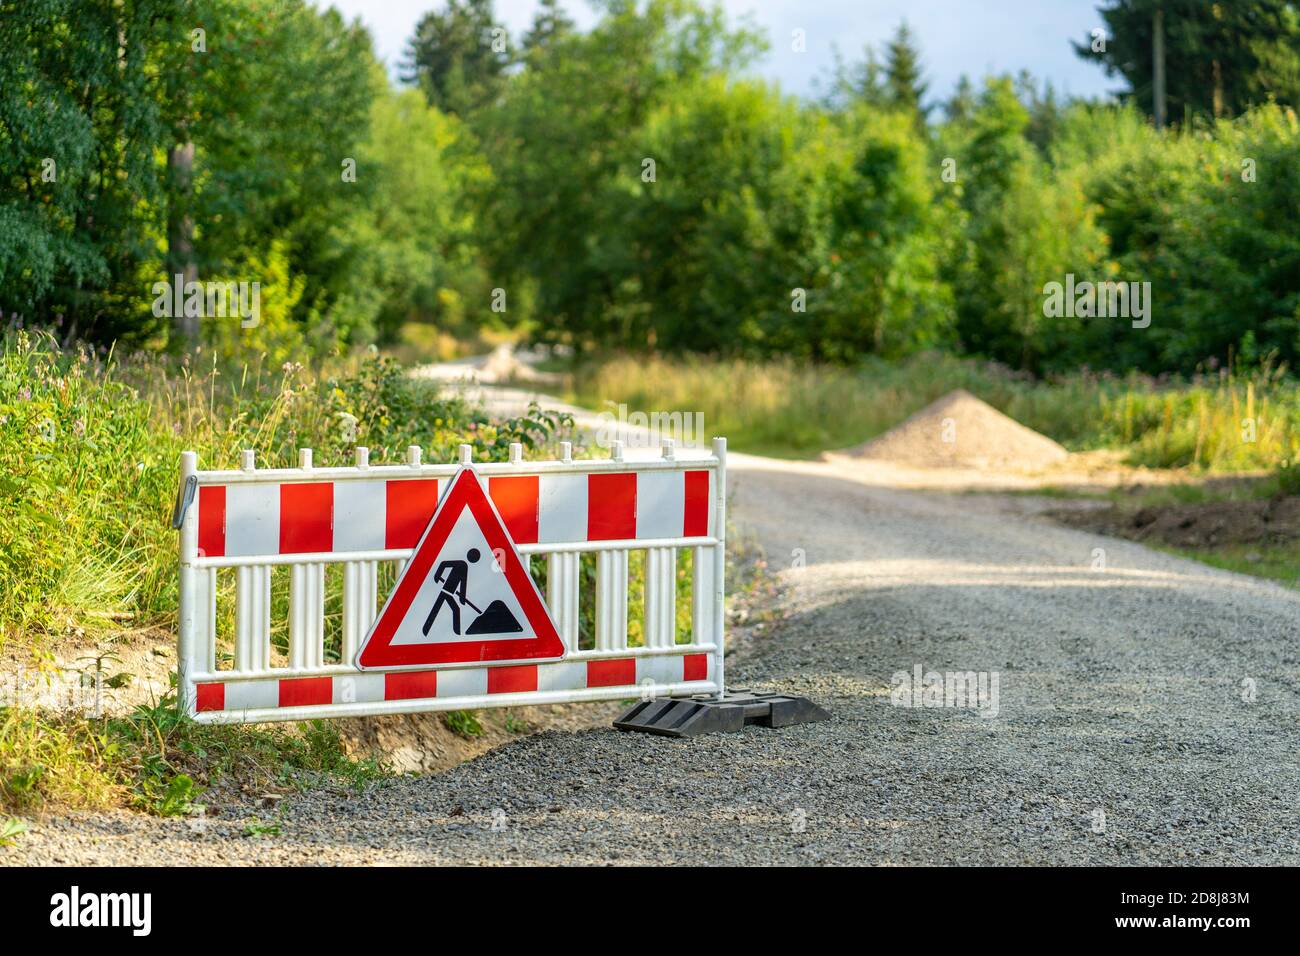 Men at work sign next to a pile of sand in a green area Stock Photo